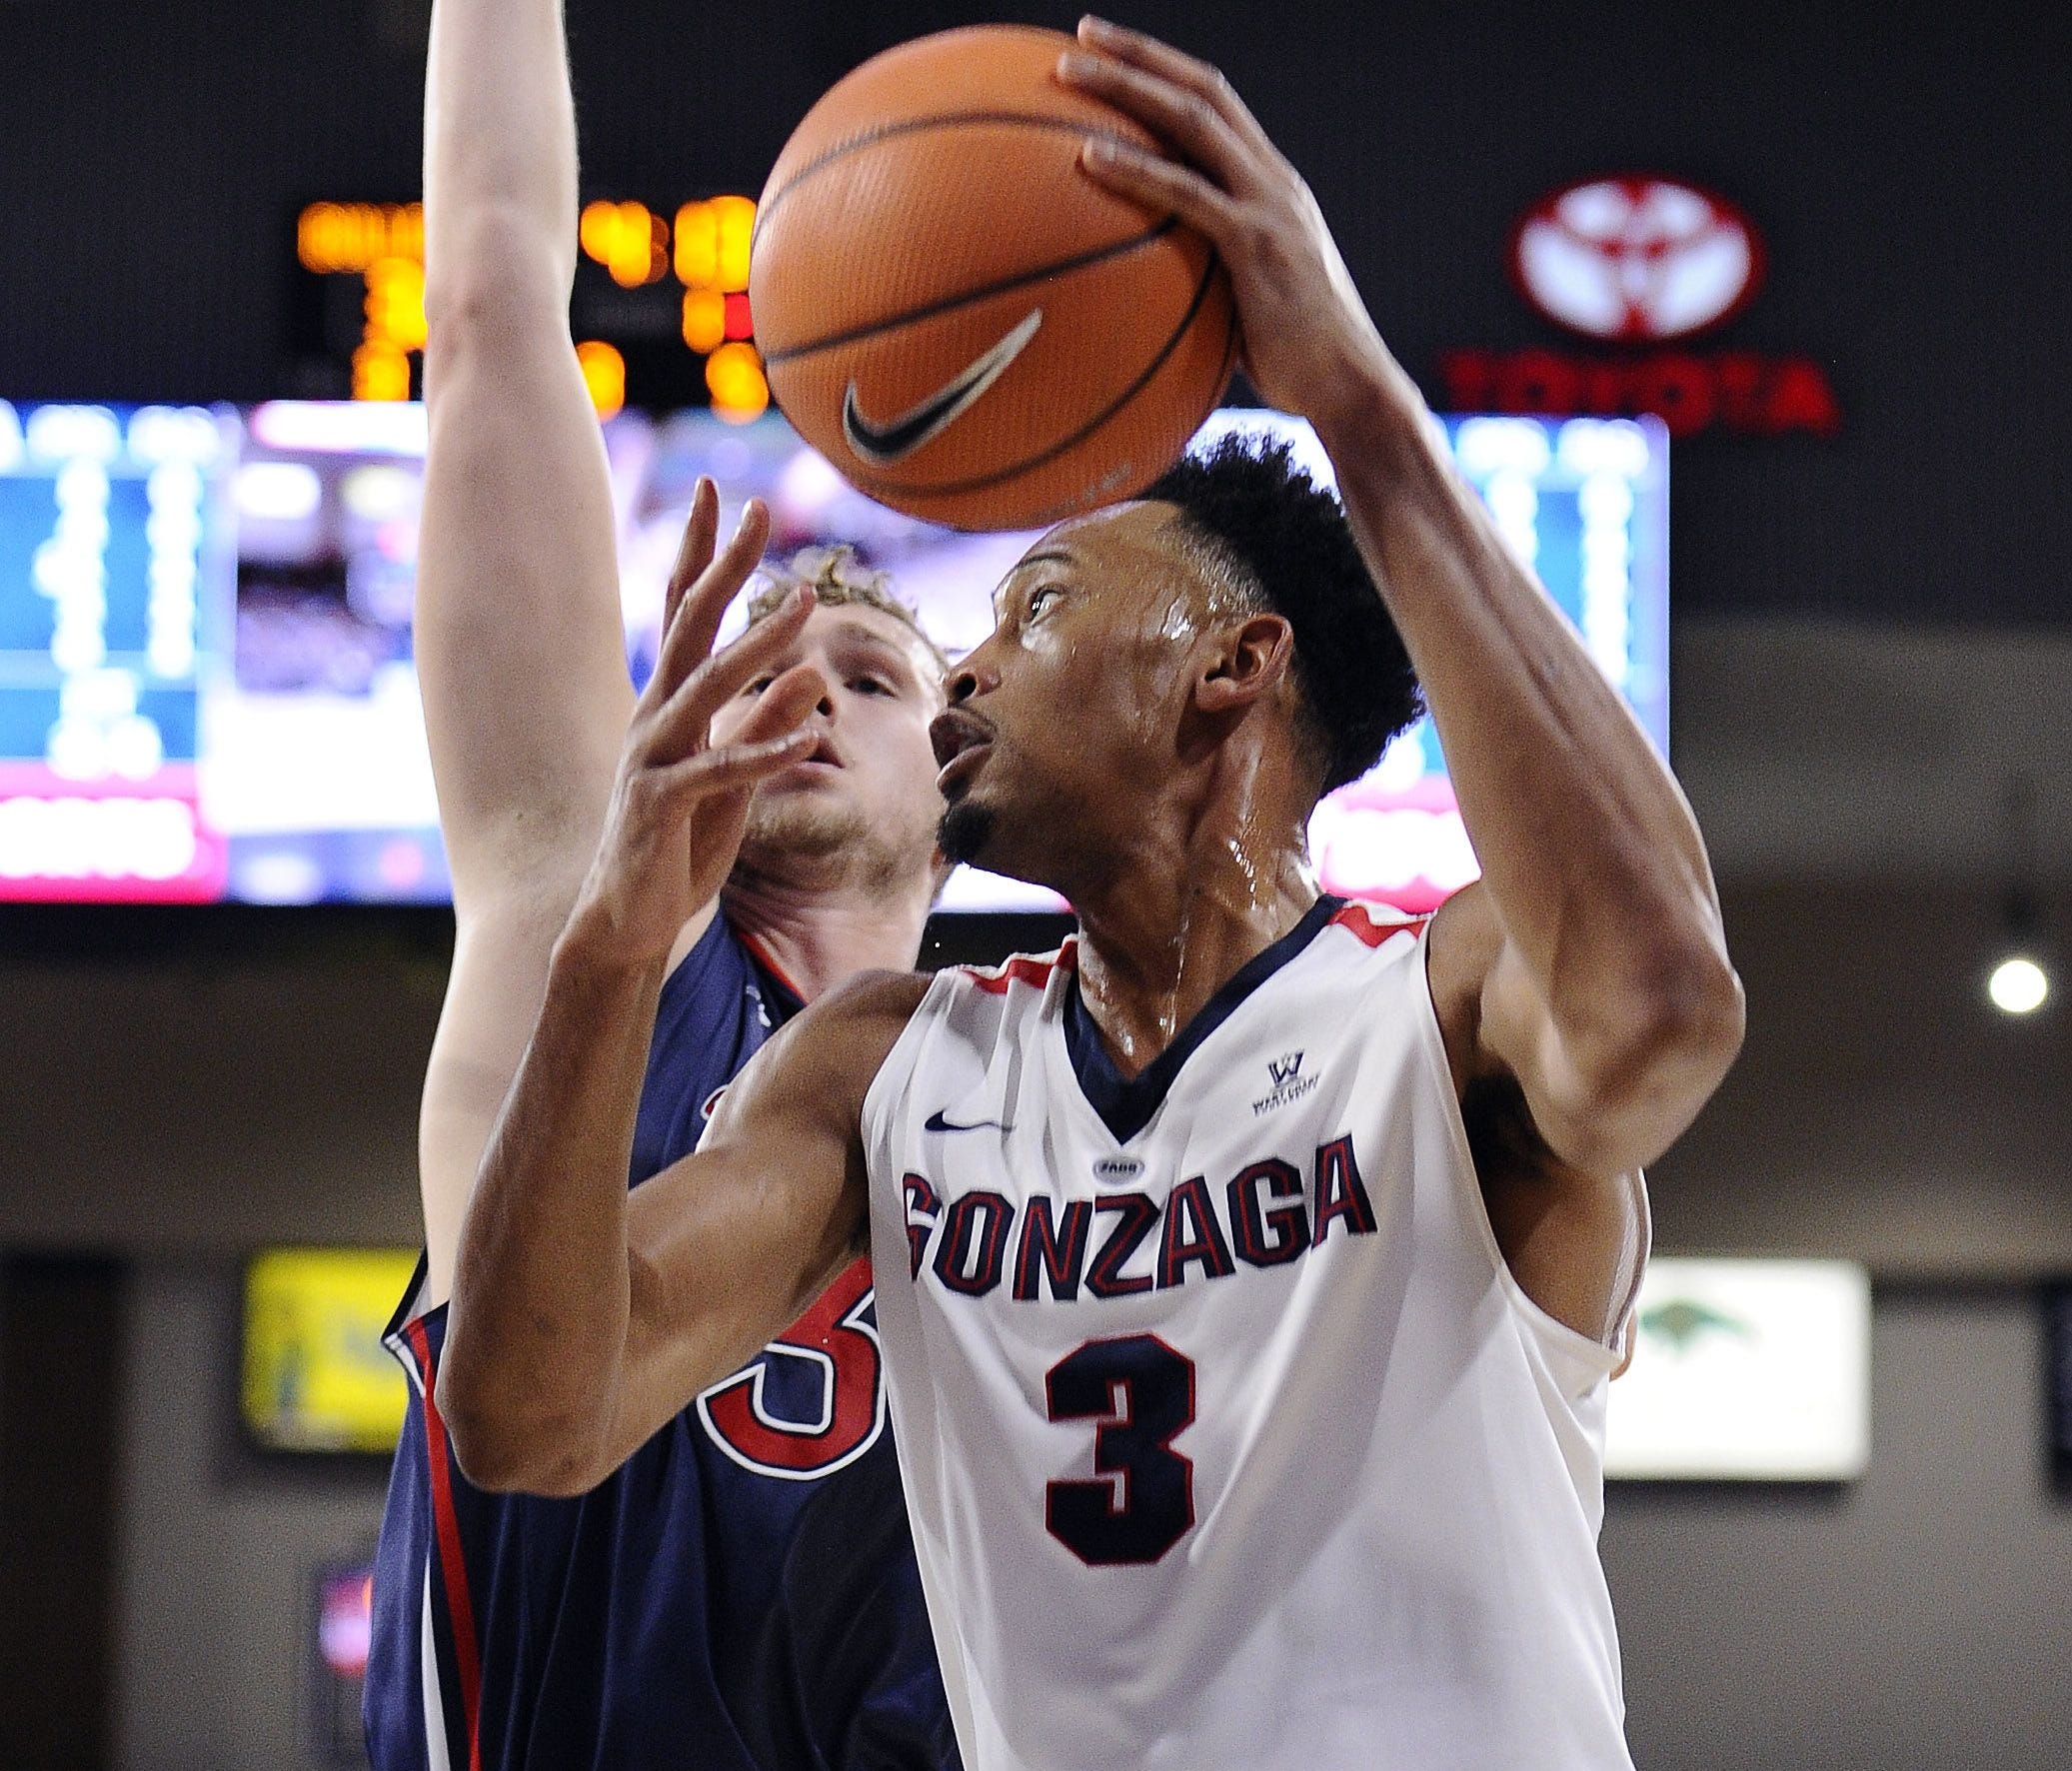 Gonzaga Bulldogs forward Johnathan Williams (3) shoots the basketball against St. Mary's Gaels center Jock Landale (34) during the first half at McCarthey Athletic Center.